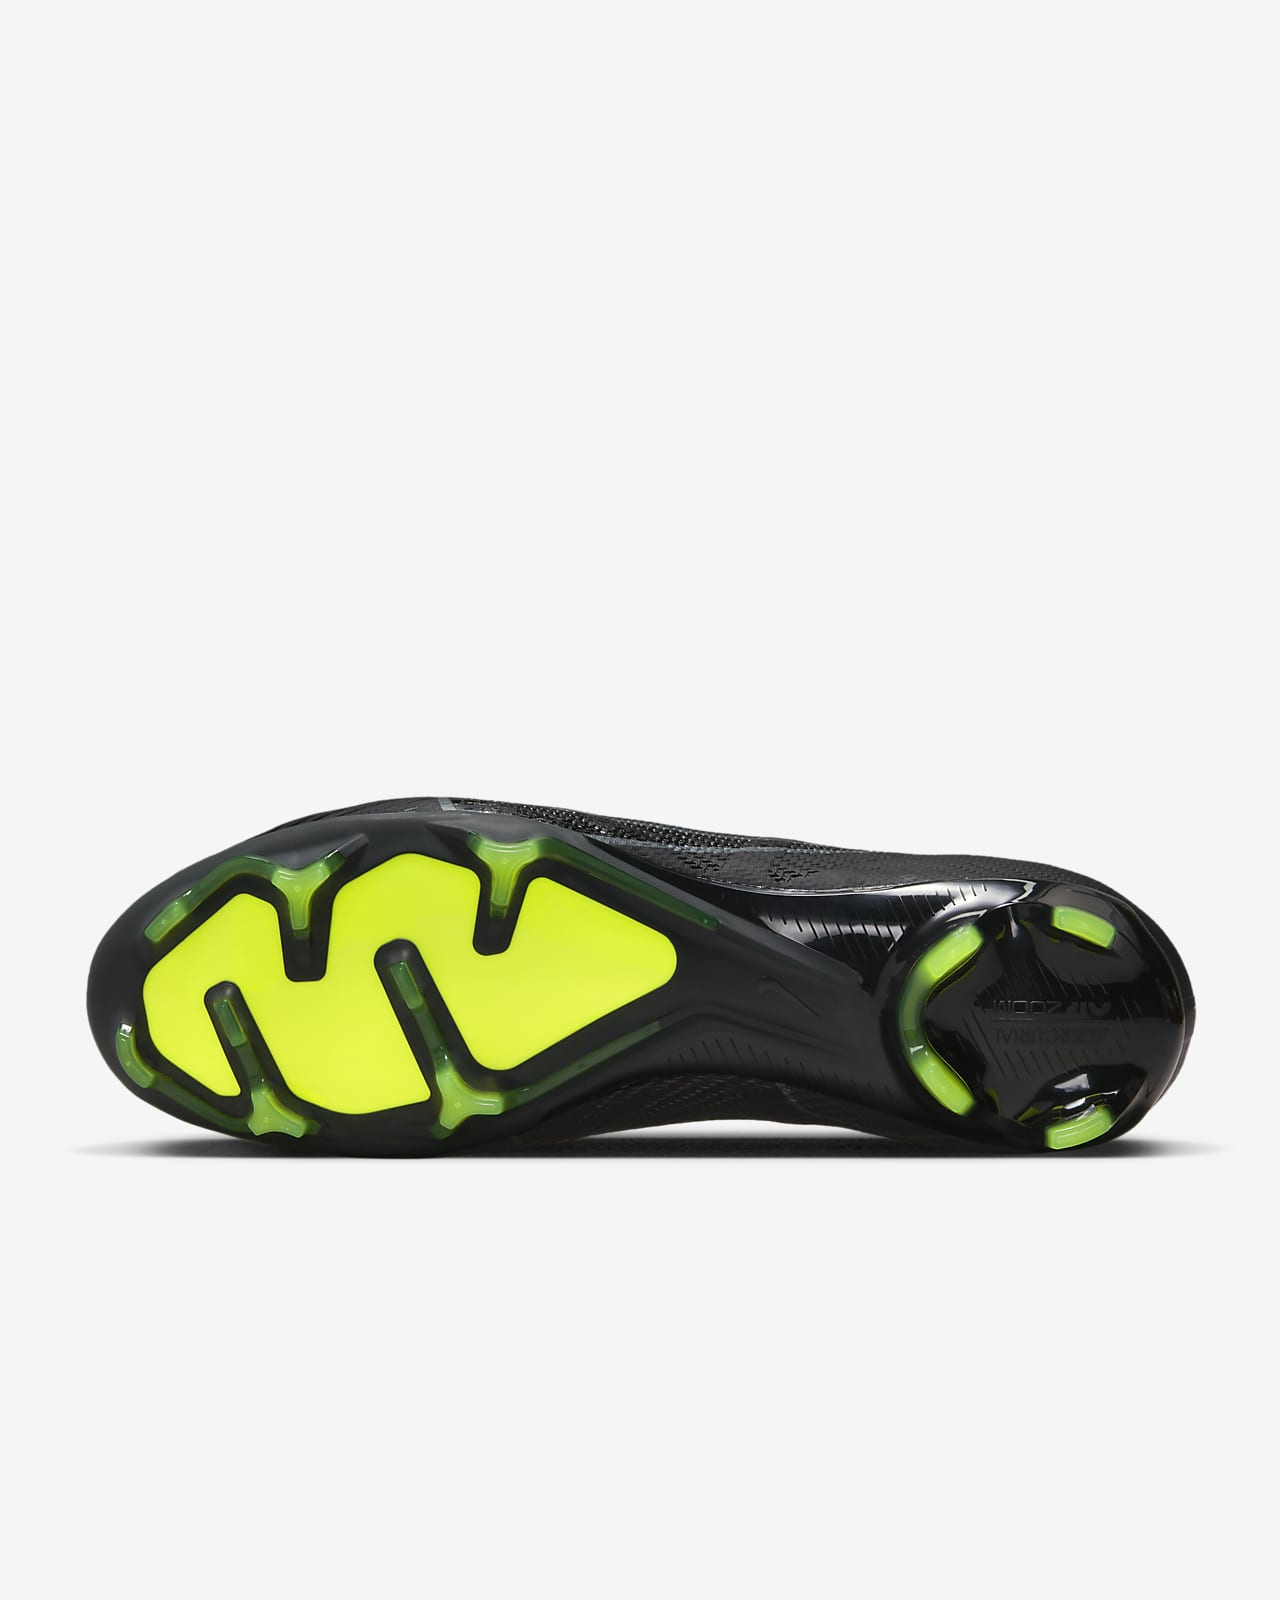 jump in Monumental Clean the floor Nike Zoom Mercurial Vapor 15 Pro FG Firm-Ground Soccer Cleats. Nike.com